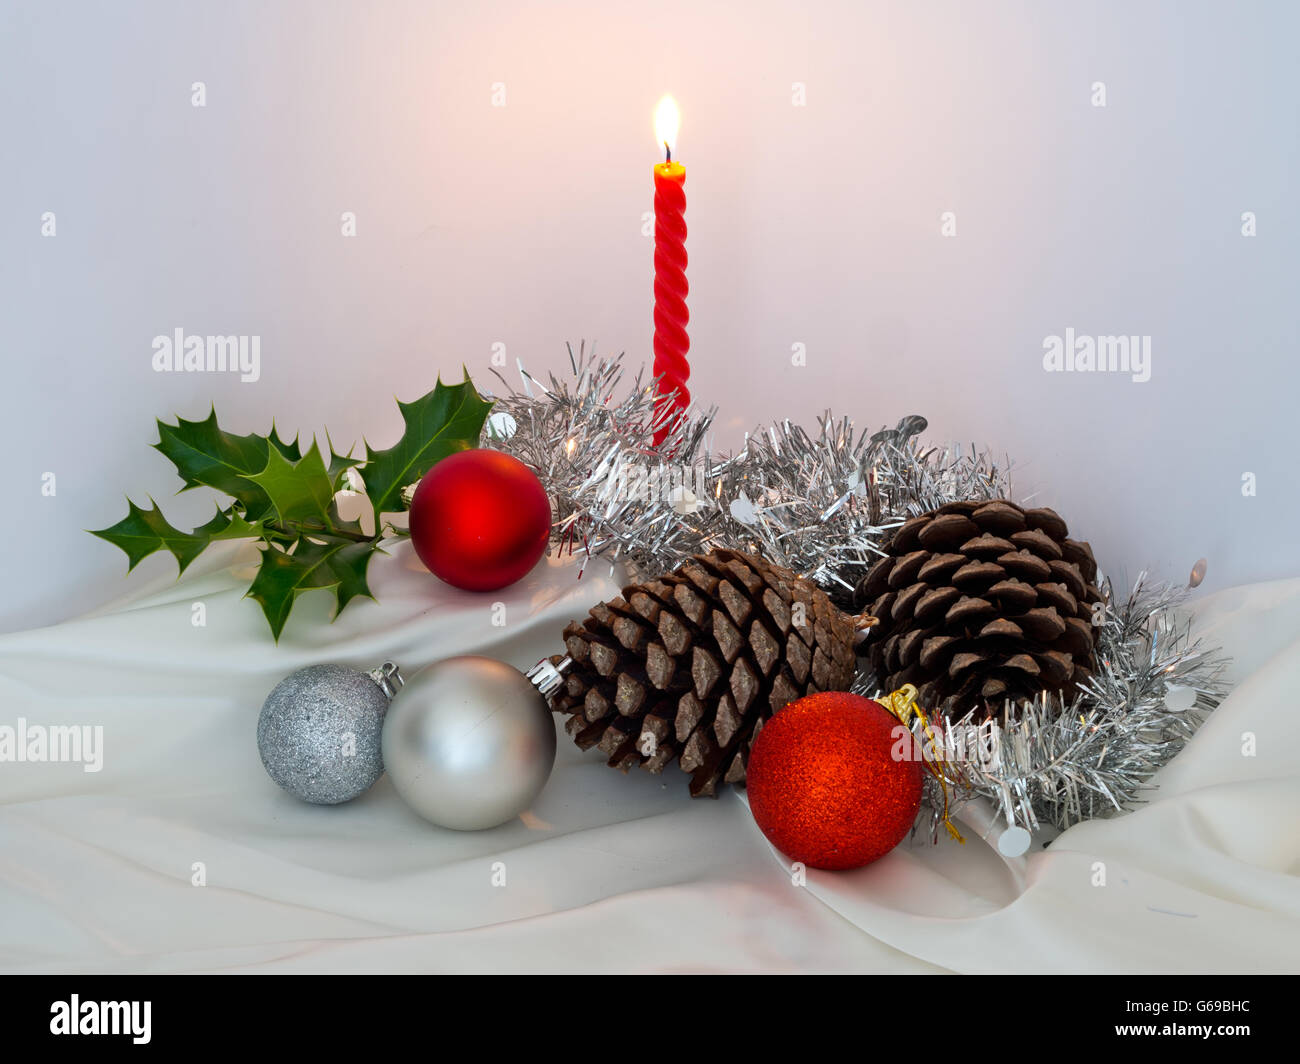 Traditional seasonal objects. Mixed lighting including candlelight. Stock Photo